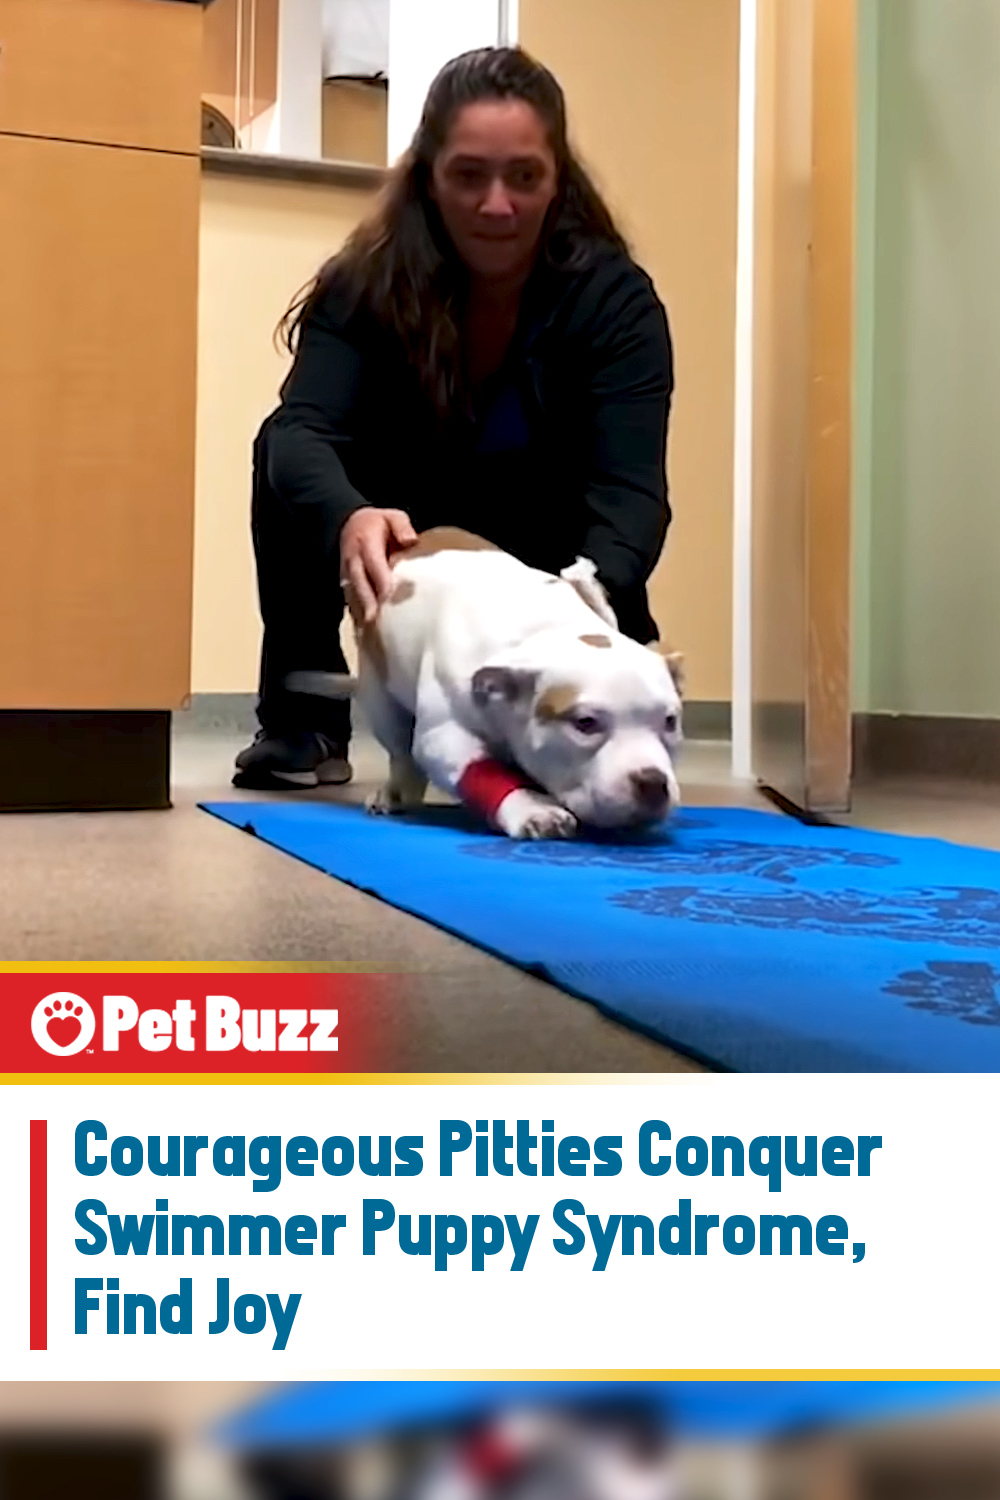 Courageous Pitties Conquer Swimmer Puppy Syndrome, Find Joy